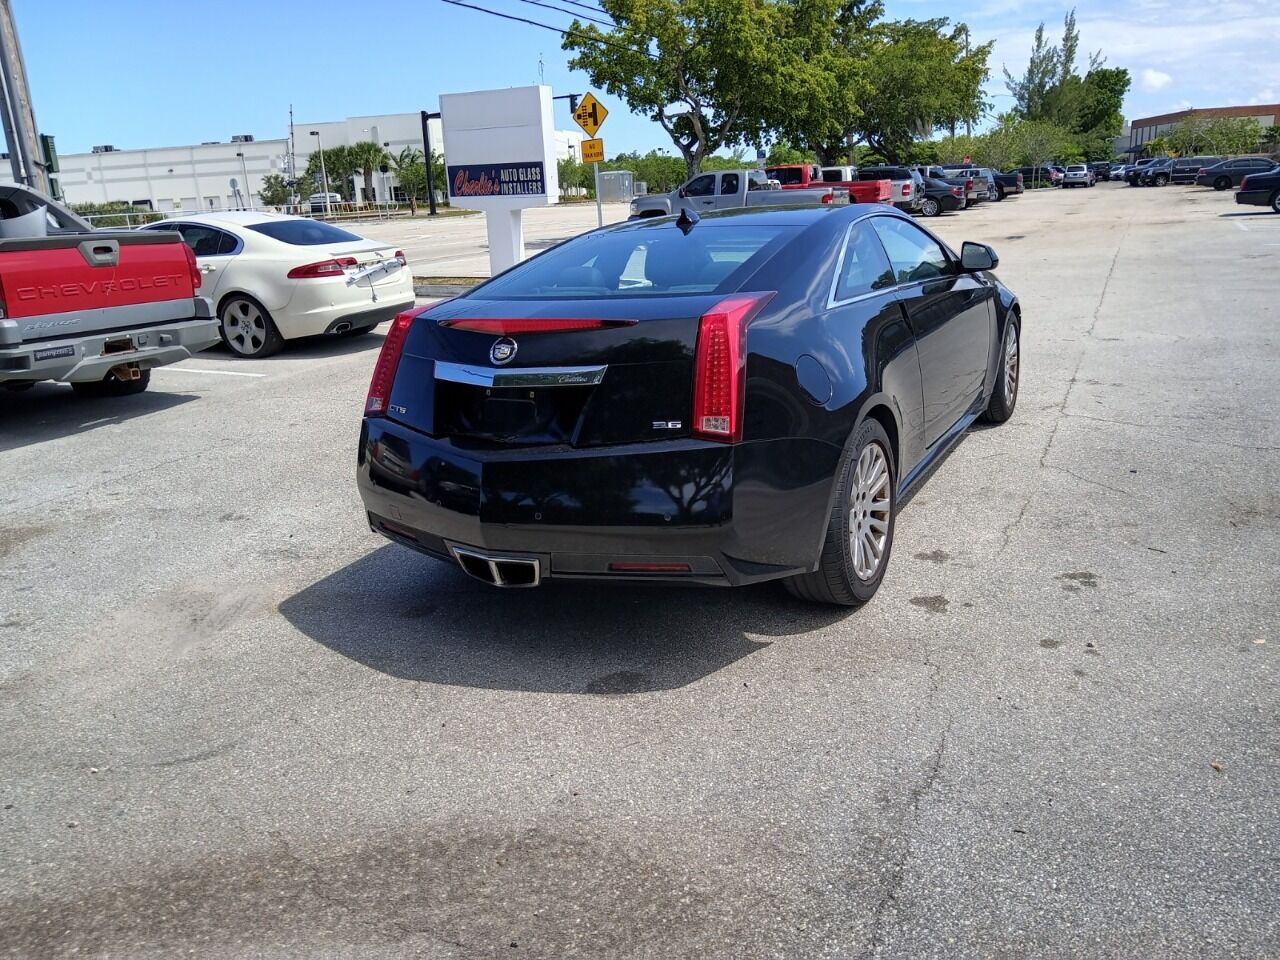 2011 CADILLAC CTS Coupe - $7,450